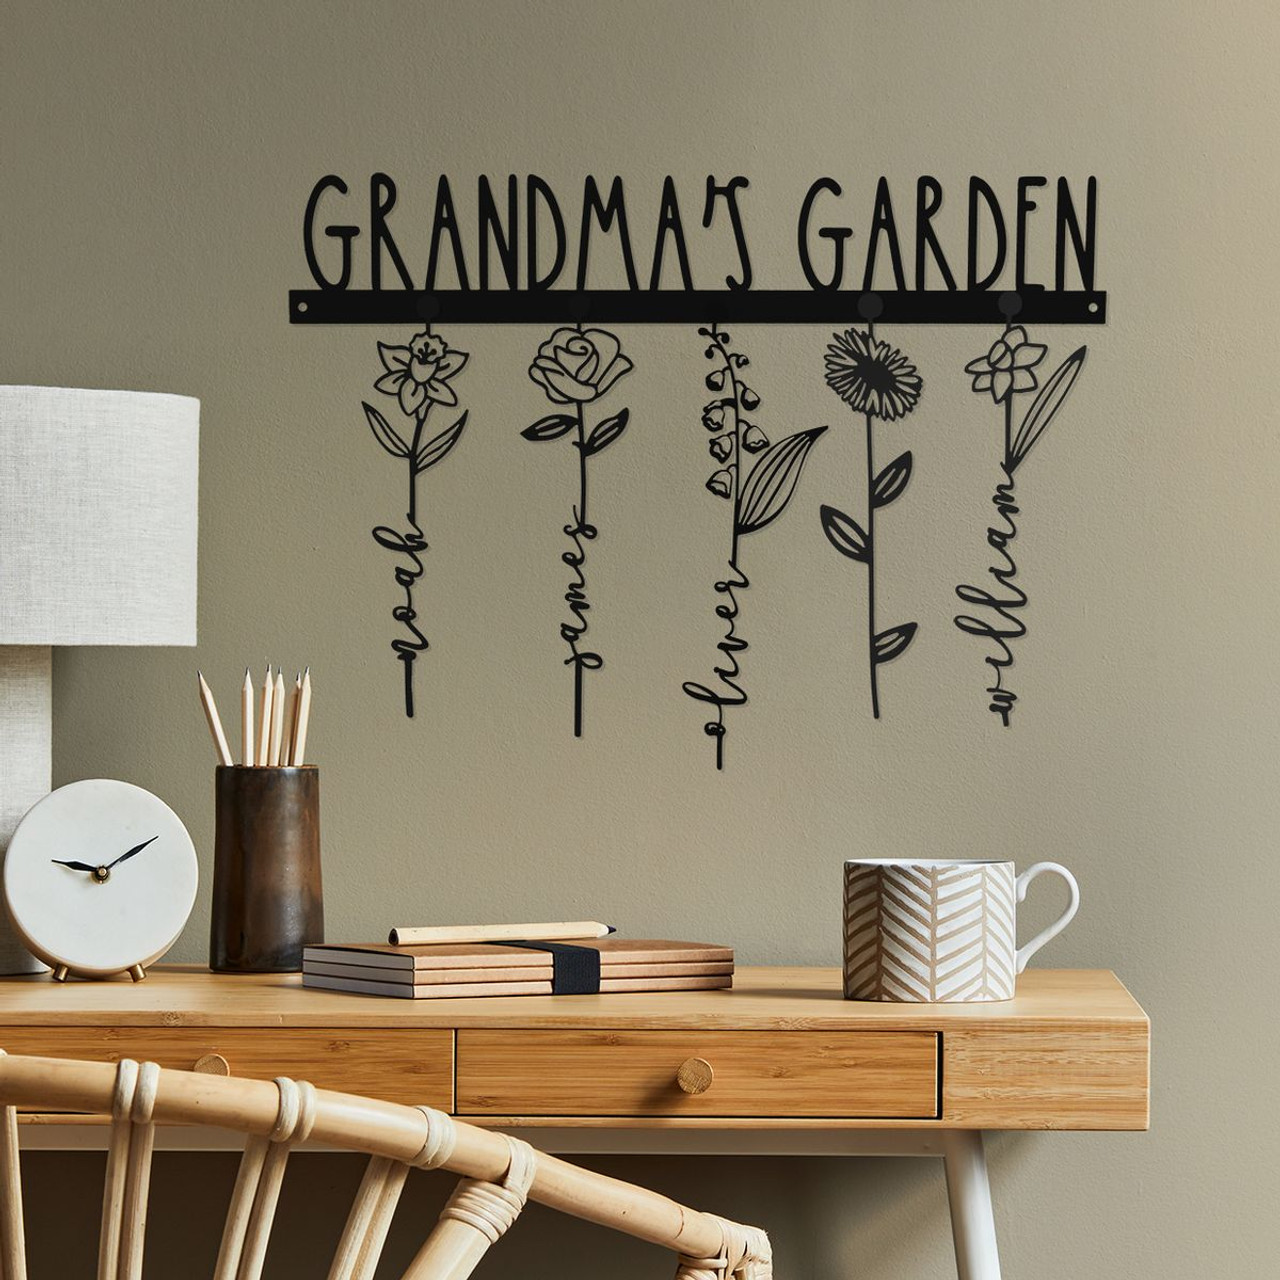 Personalized 'Our Family Garden' Plaque product image